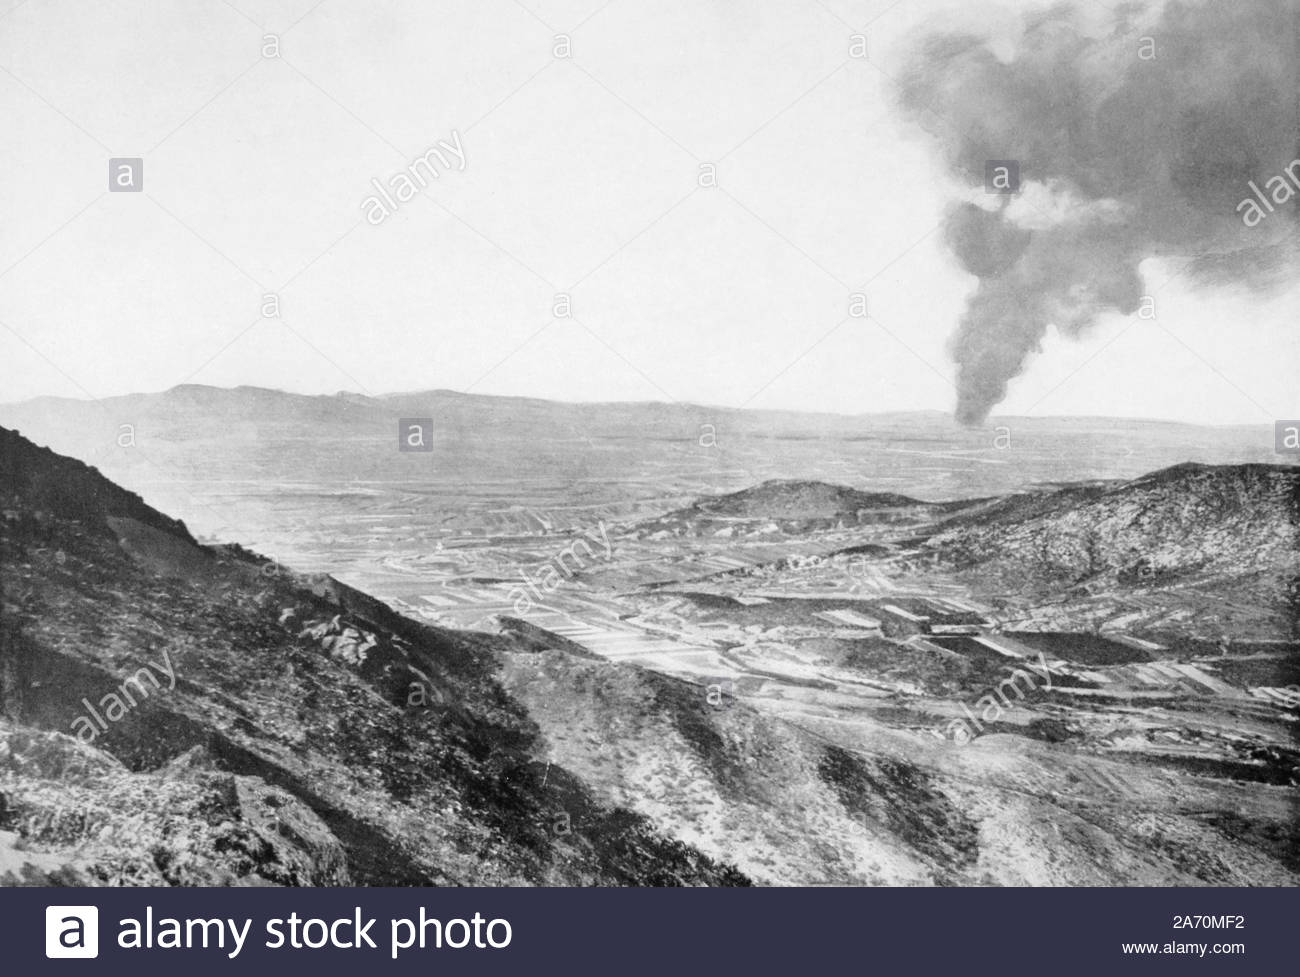 WW1 Tsingtao bombardment by British and Japanese shells, vintage photograph from 1914 Stock Photo